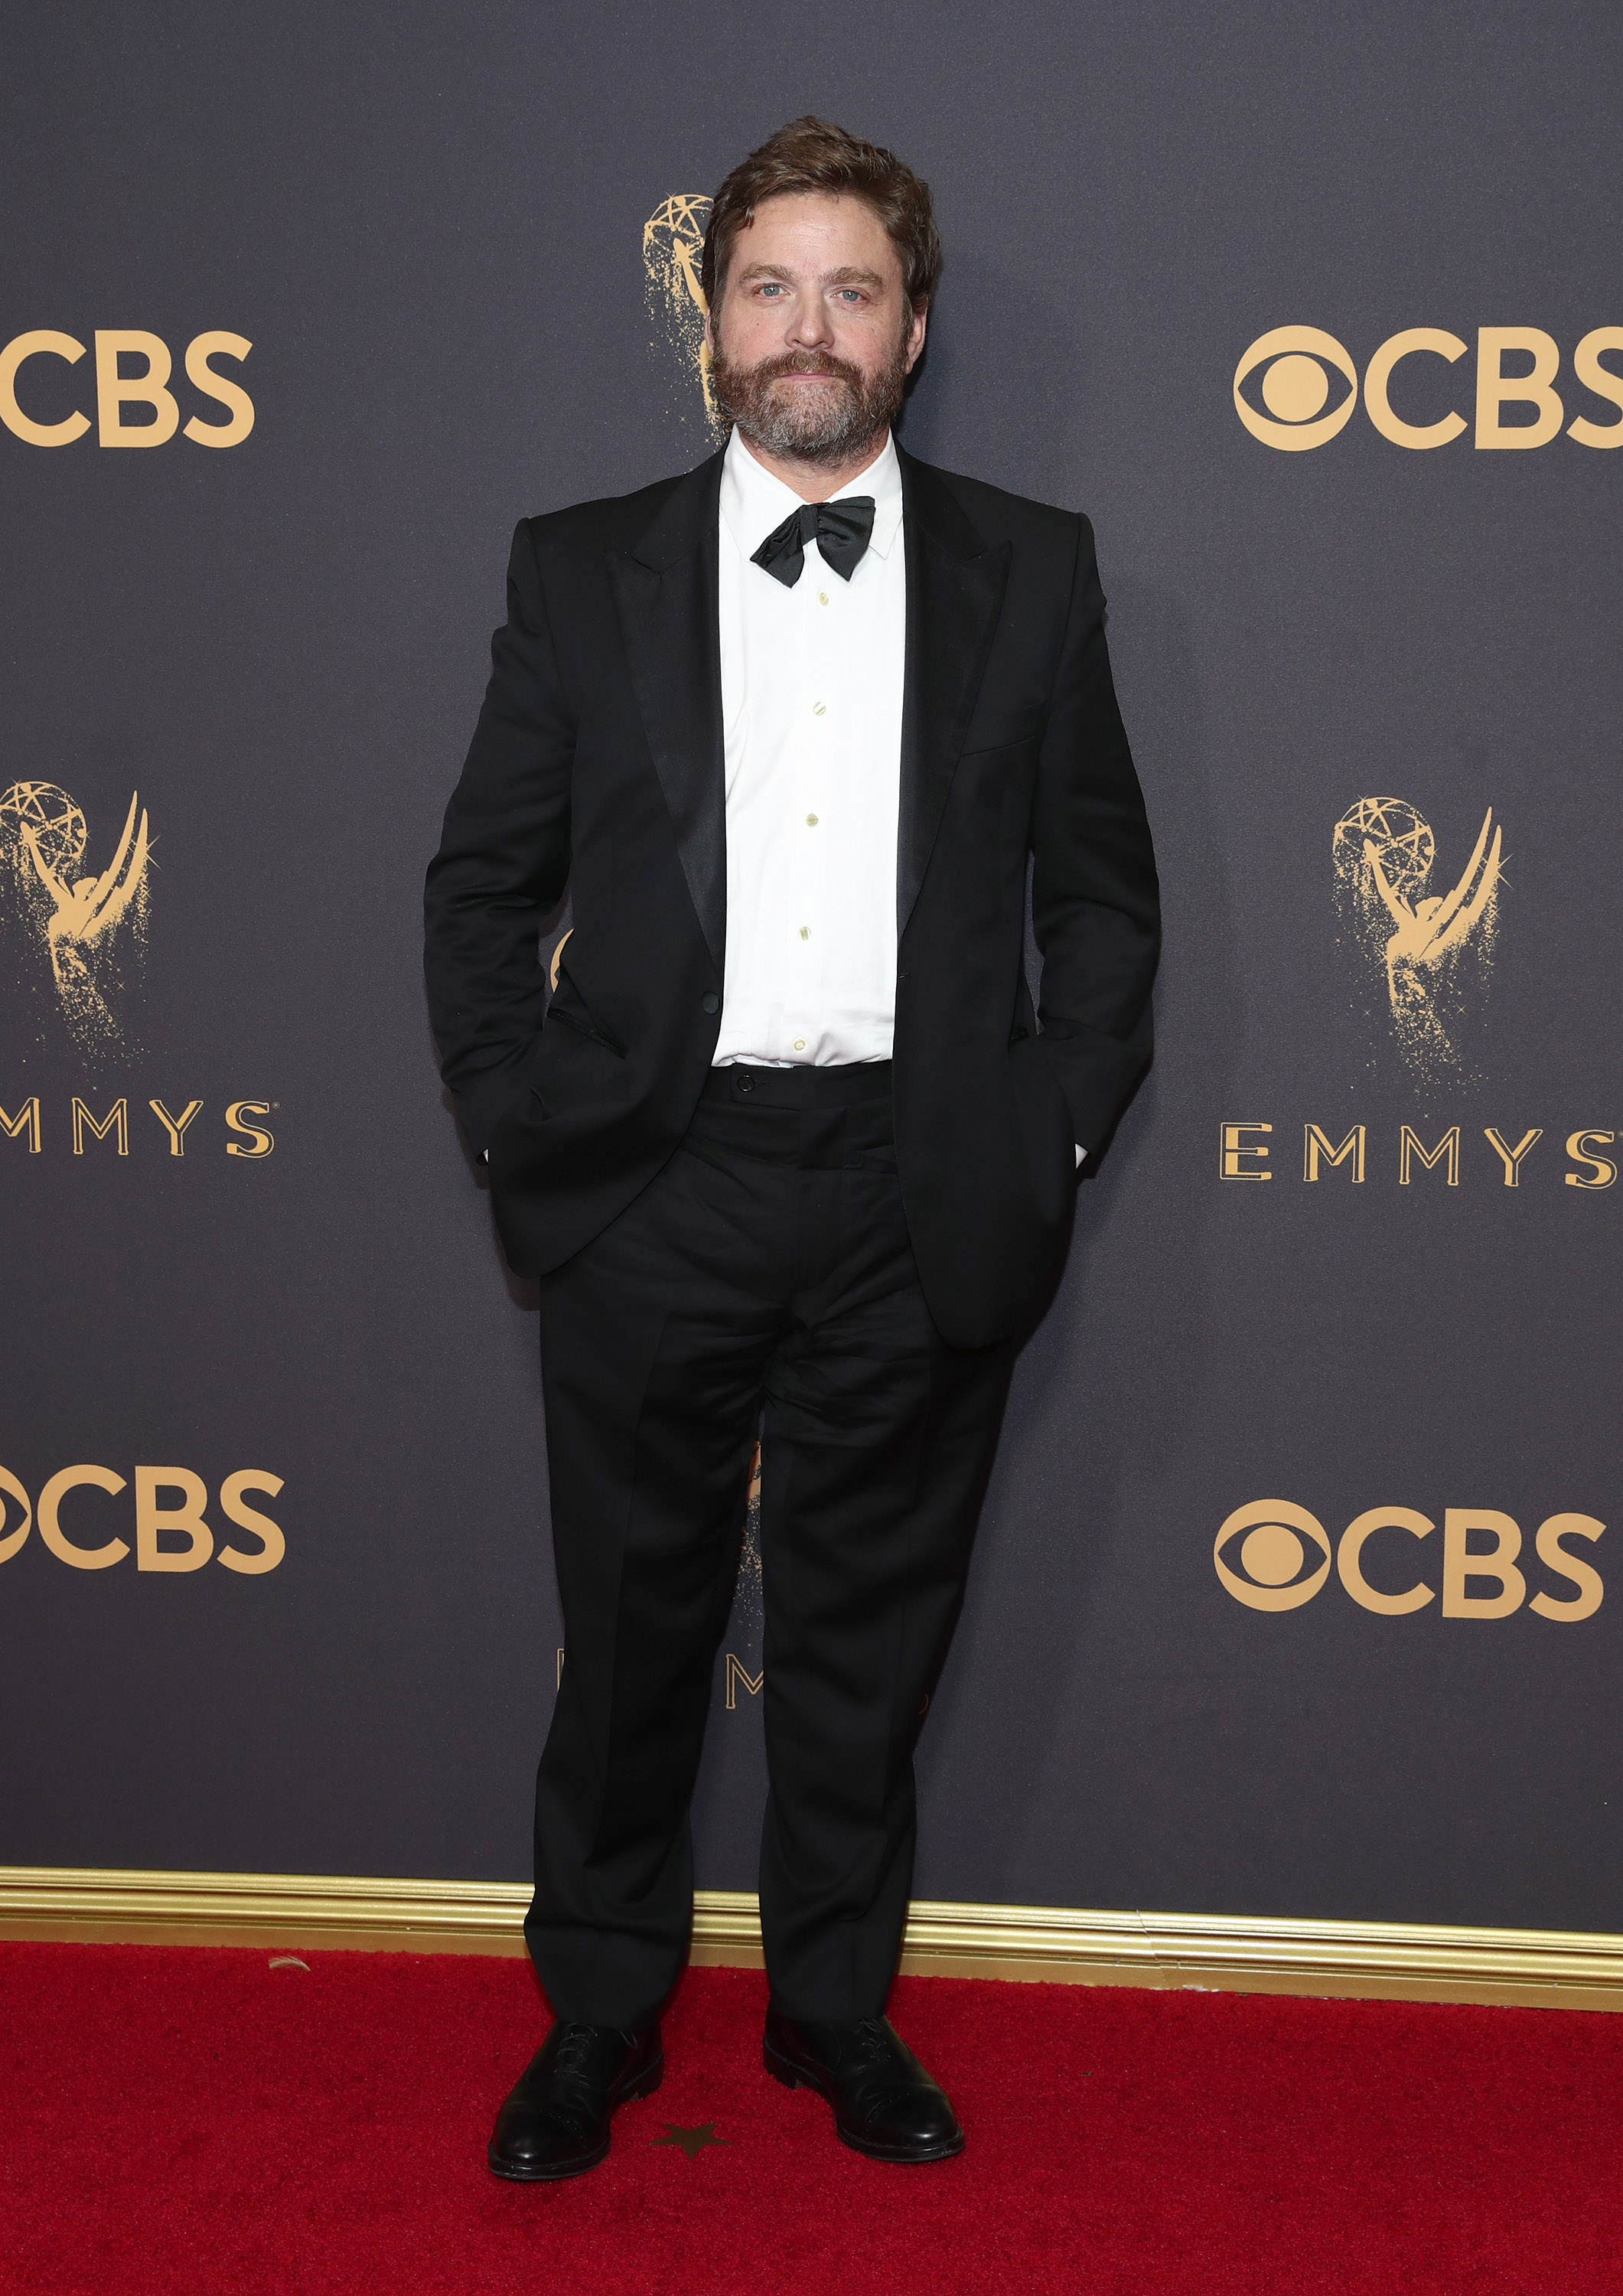 Zach Galifianakis attends the 69th Annual Primetime Emmy Awards at Microsoft Theater in Los Angeles, California, on September 17, 2017. | Source: Getty Images